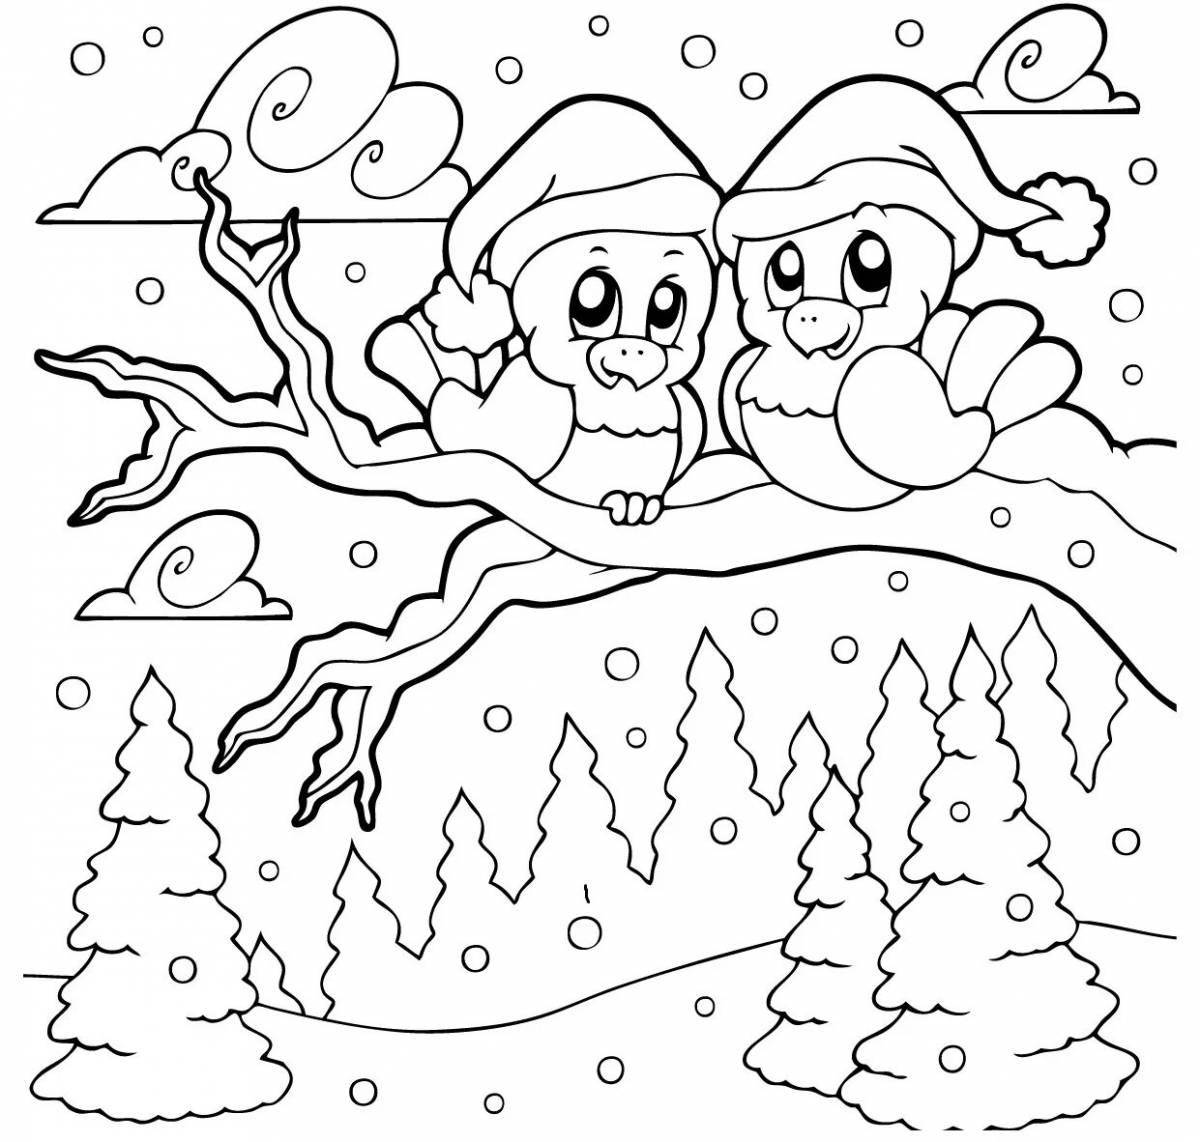 Bright winter landscape coloring for children 6-7 years old